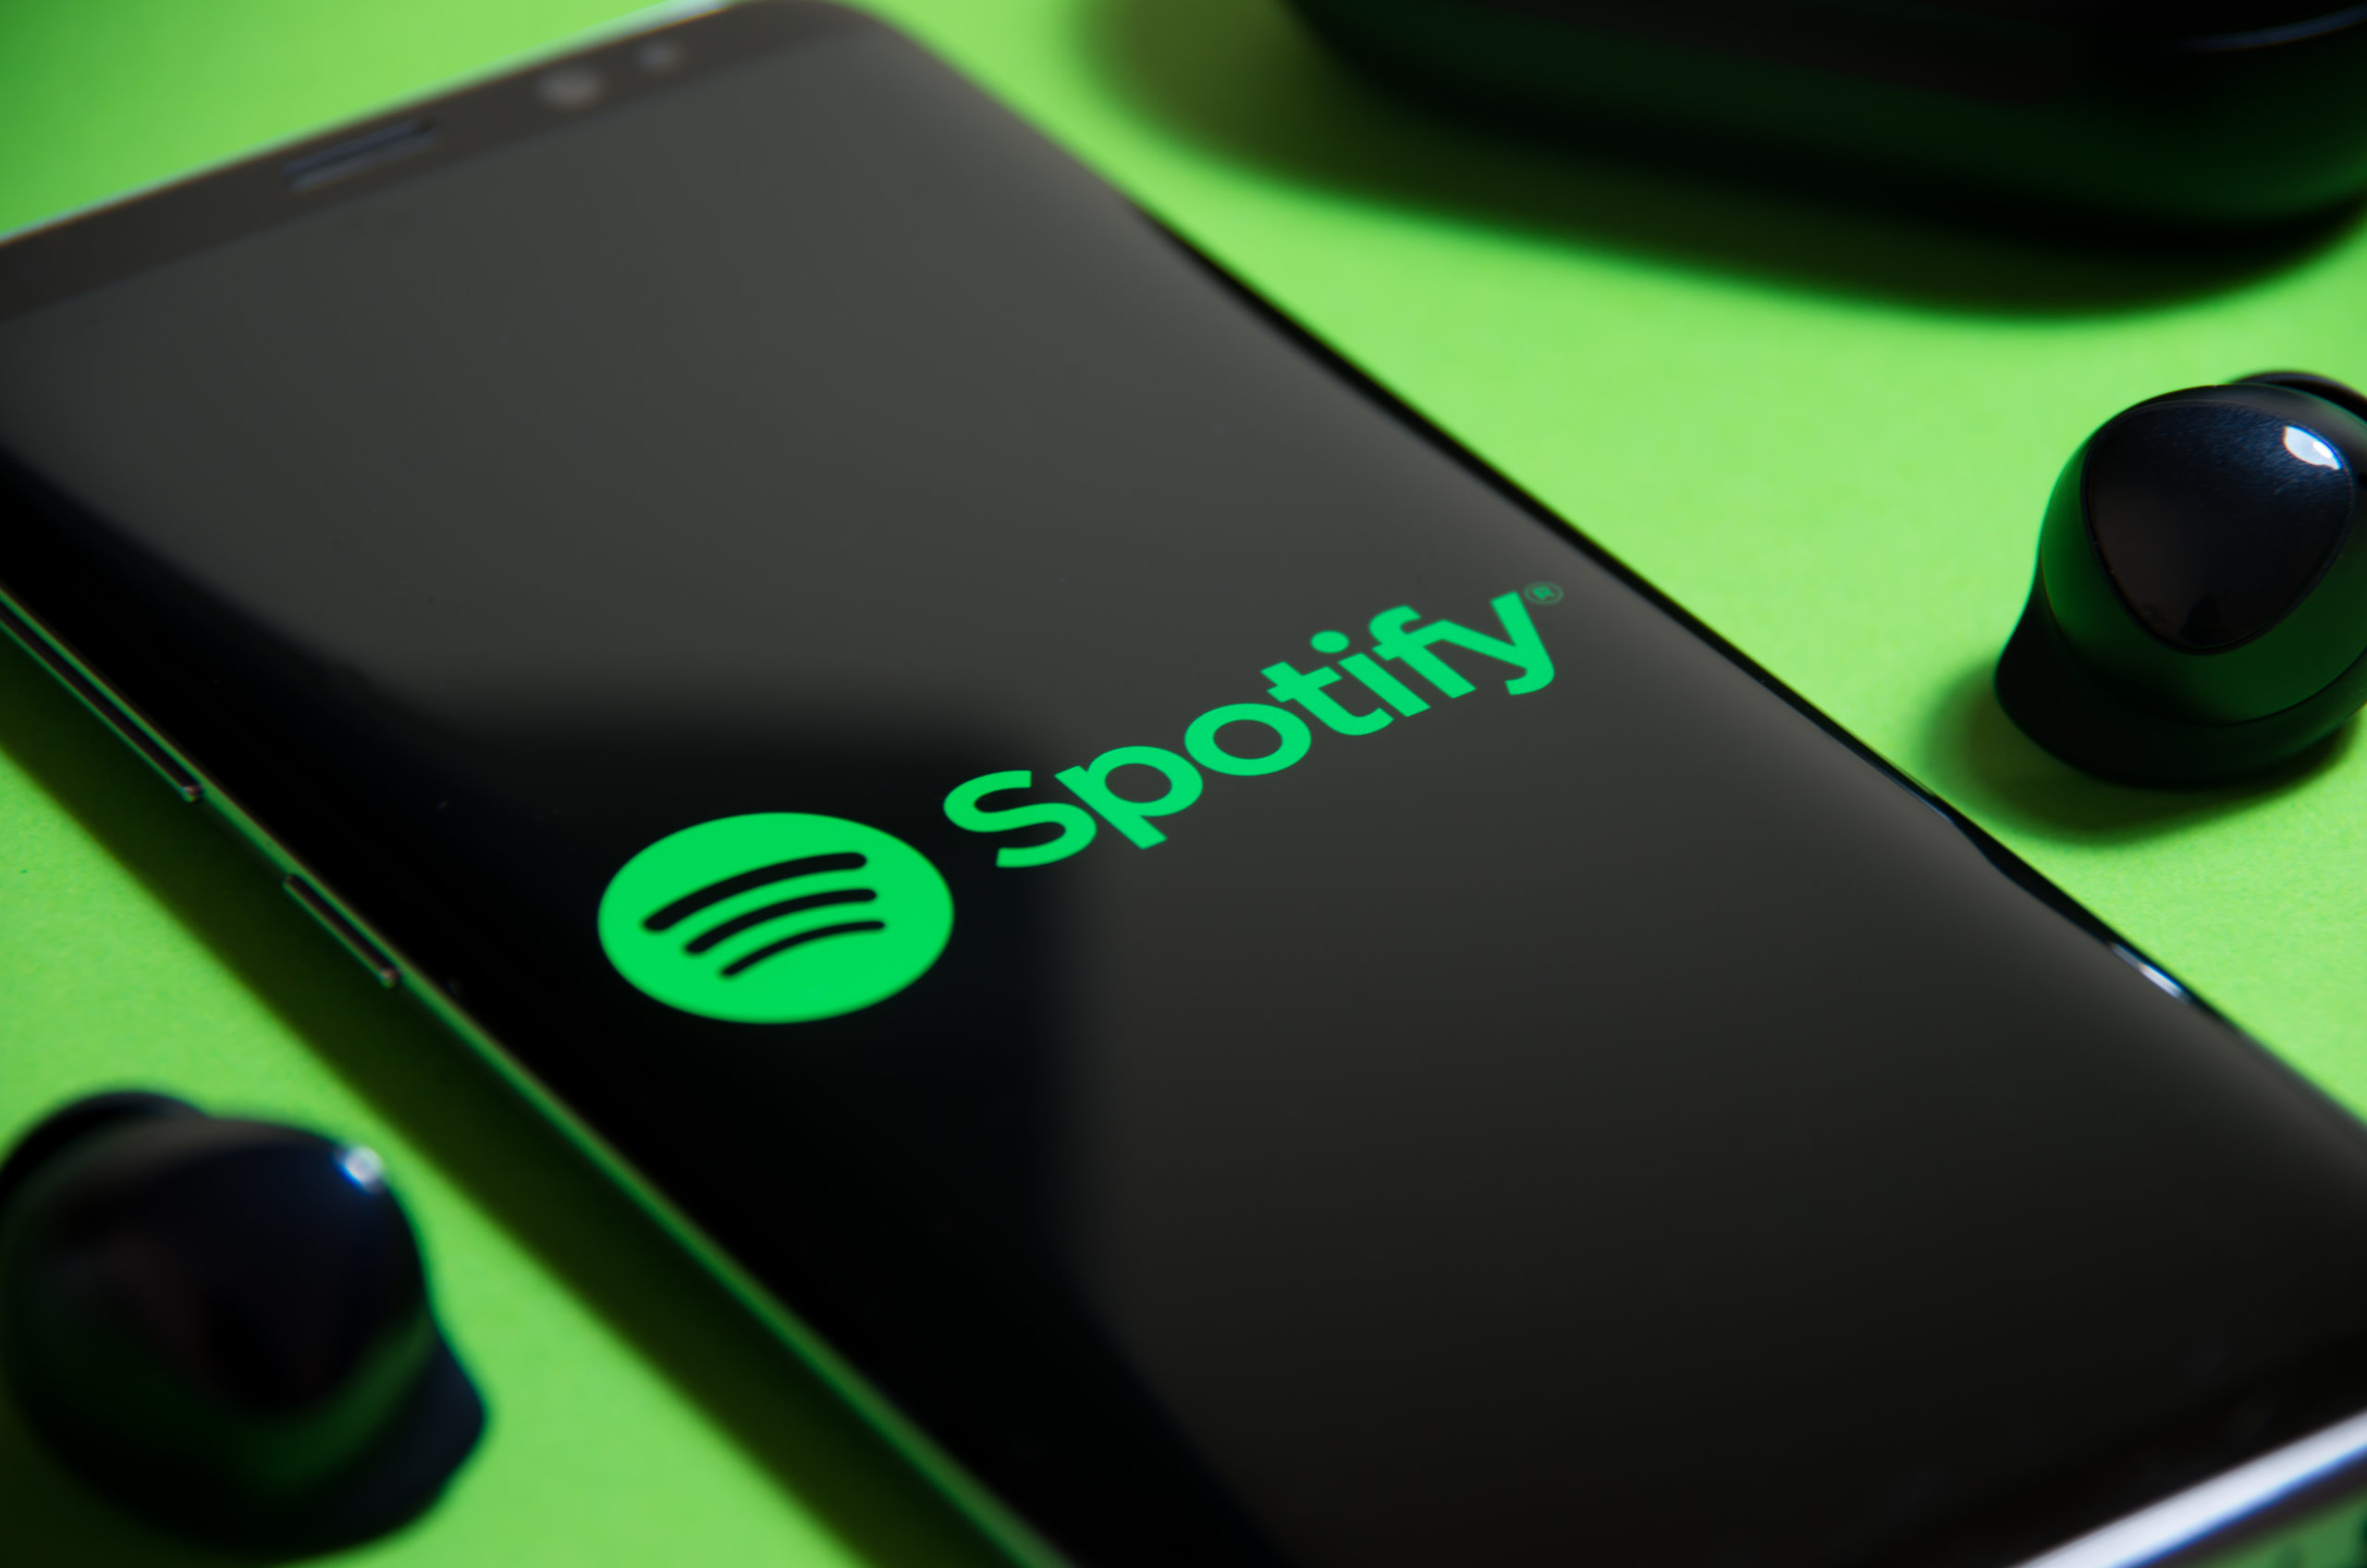 Spotify officially launches ‘Music Streaming Service’ in Korea